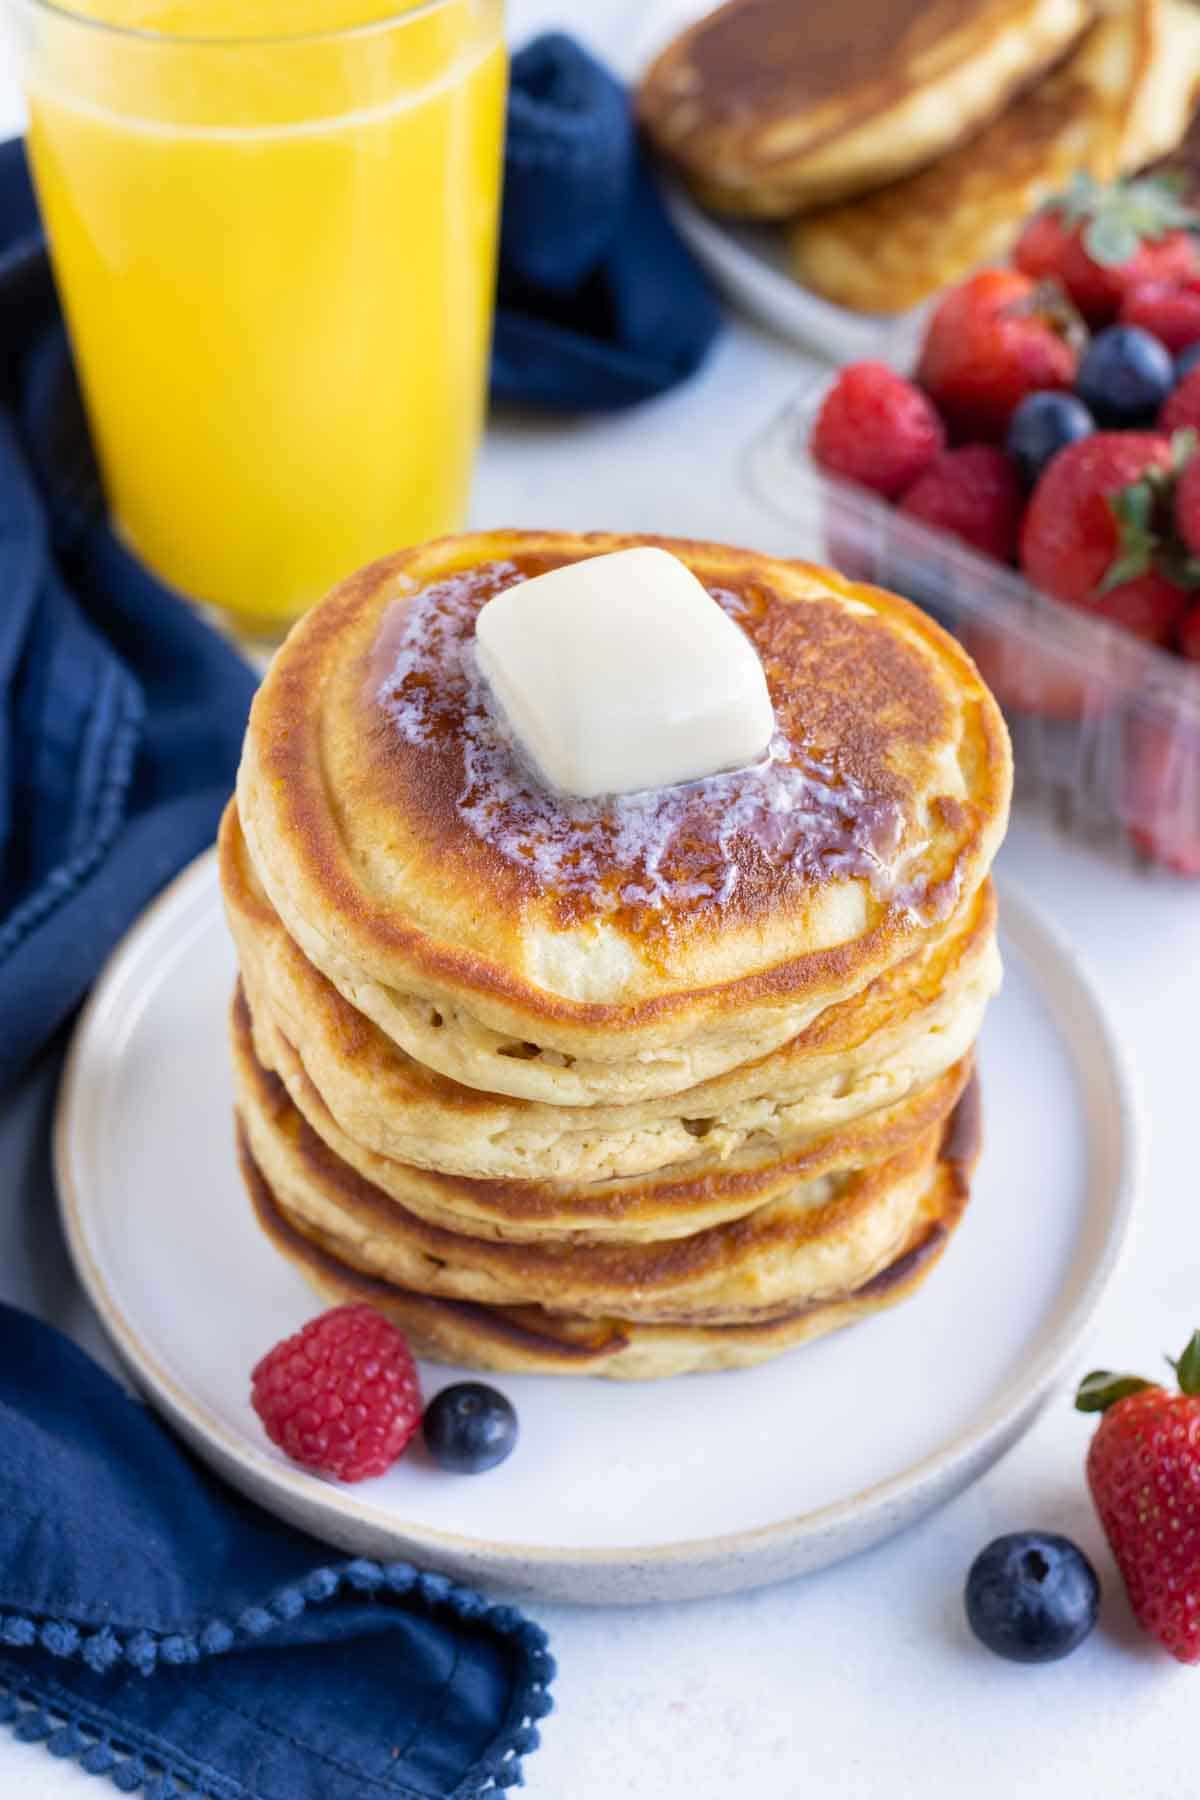 Butter Is placed on top of the pancakes.